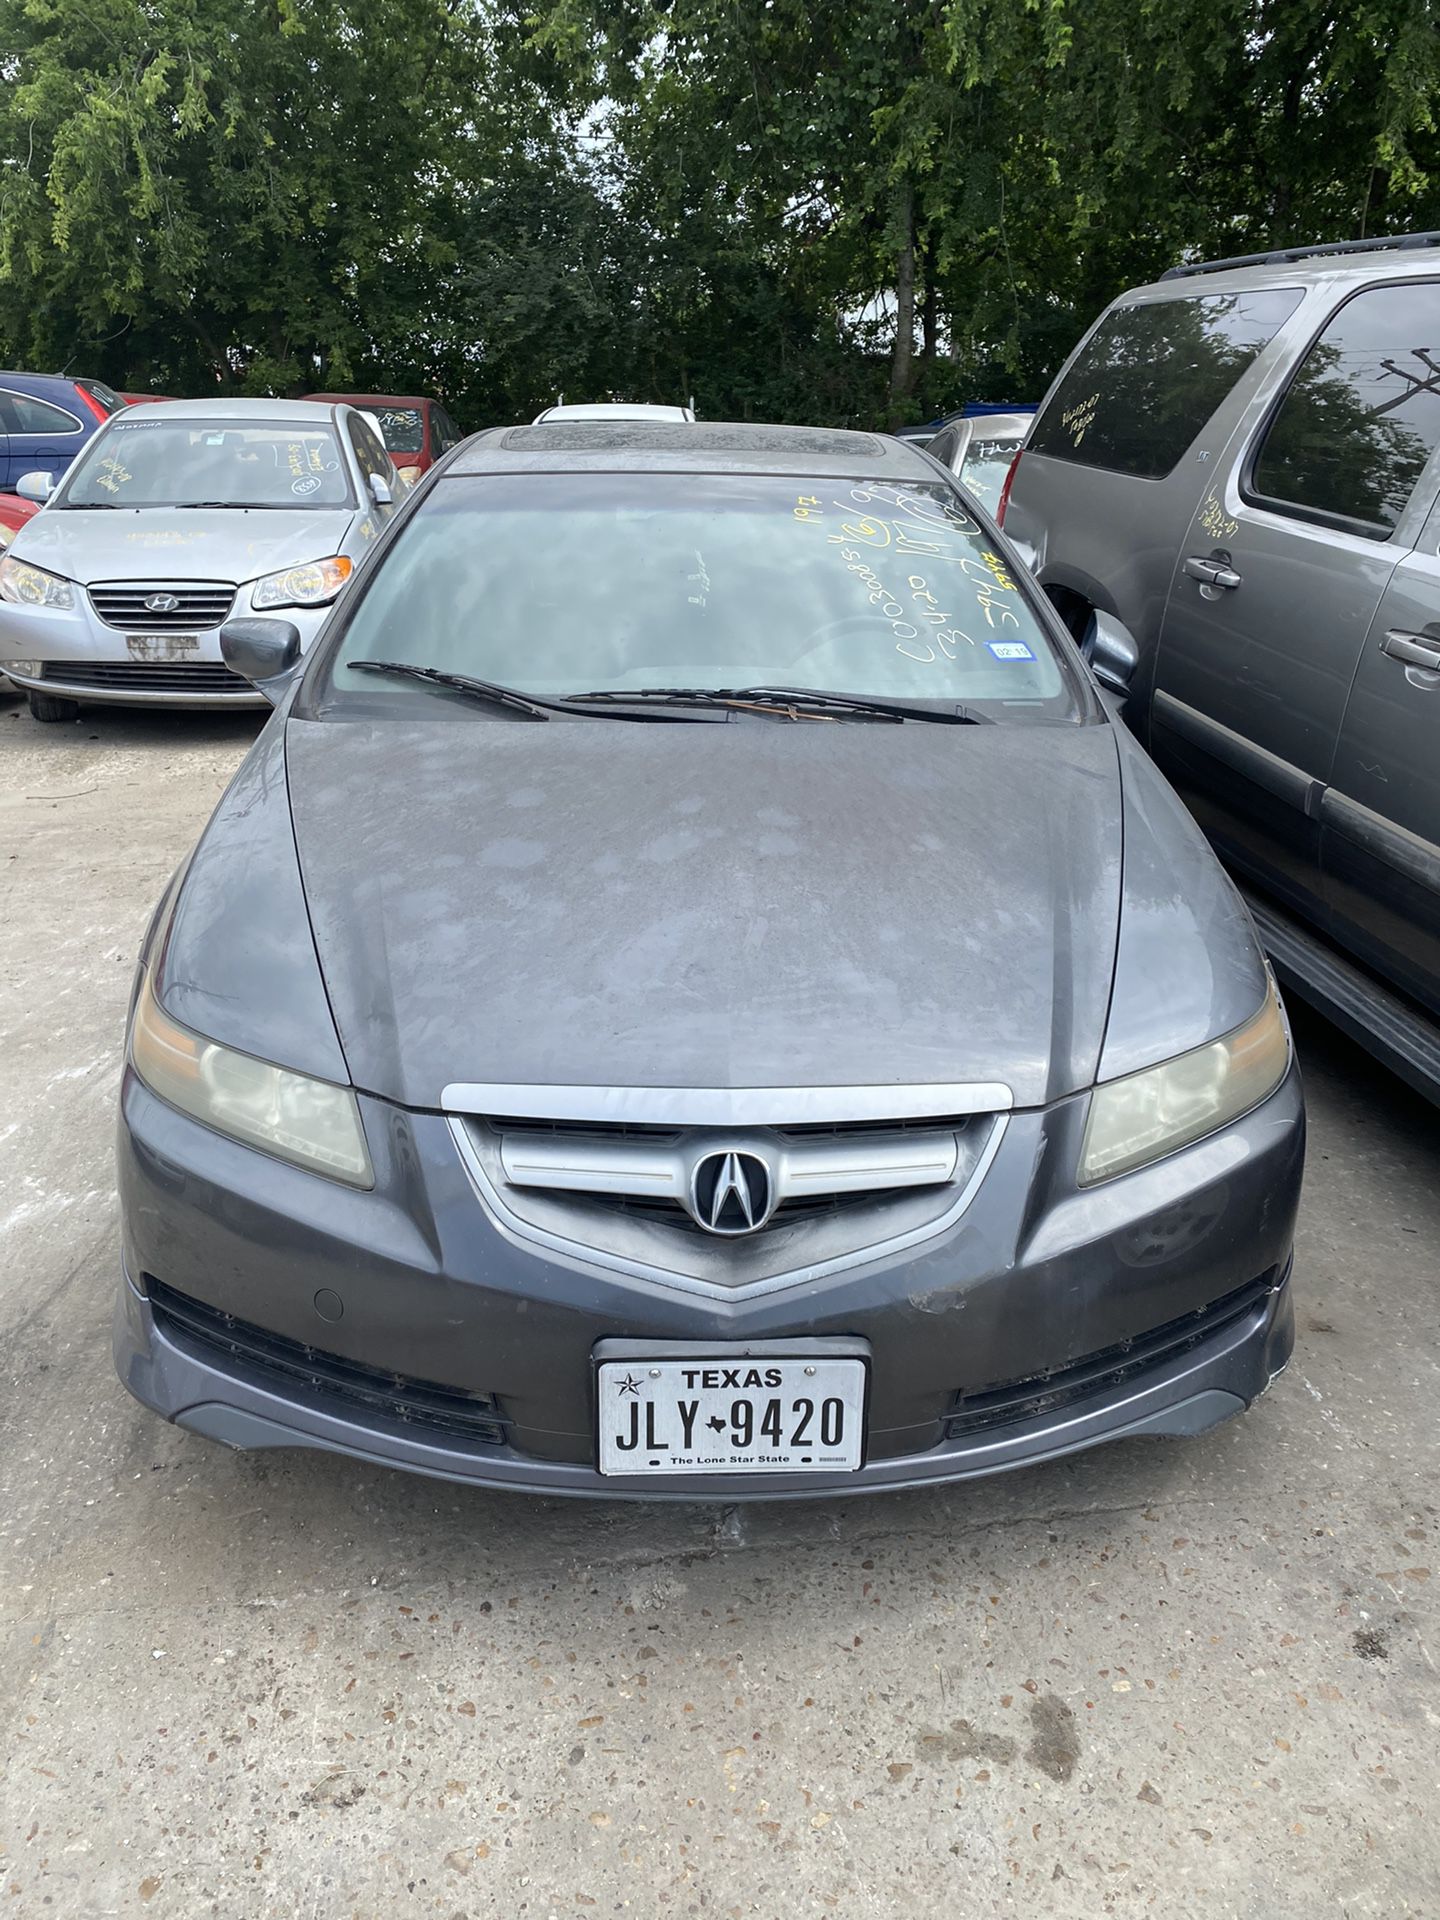 2005 Acura TL for parts!!!!!!